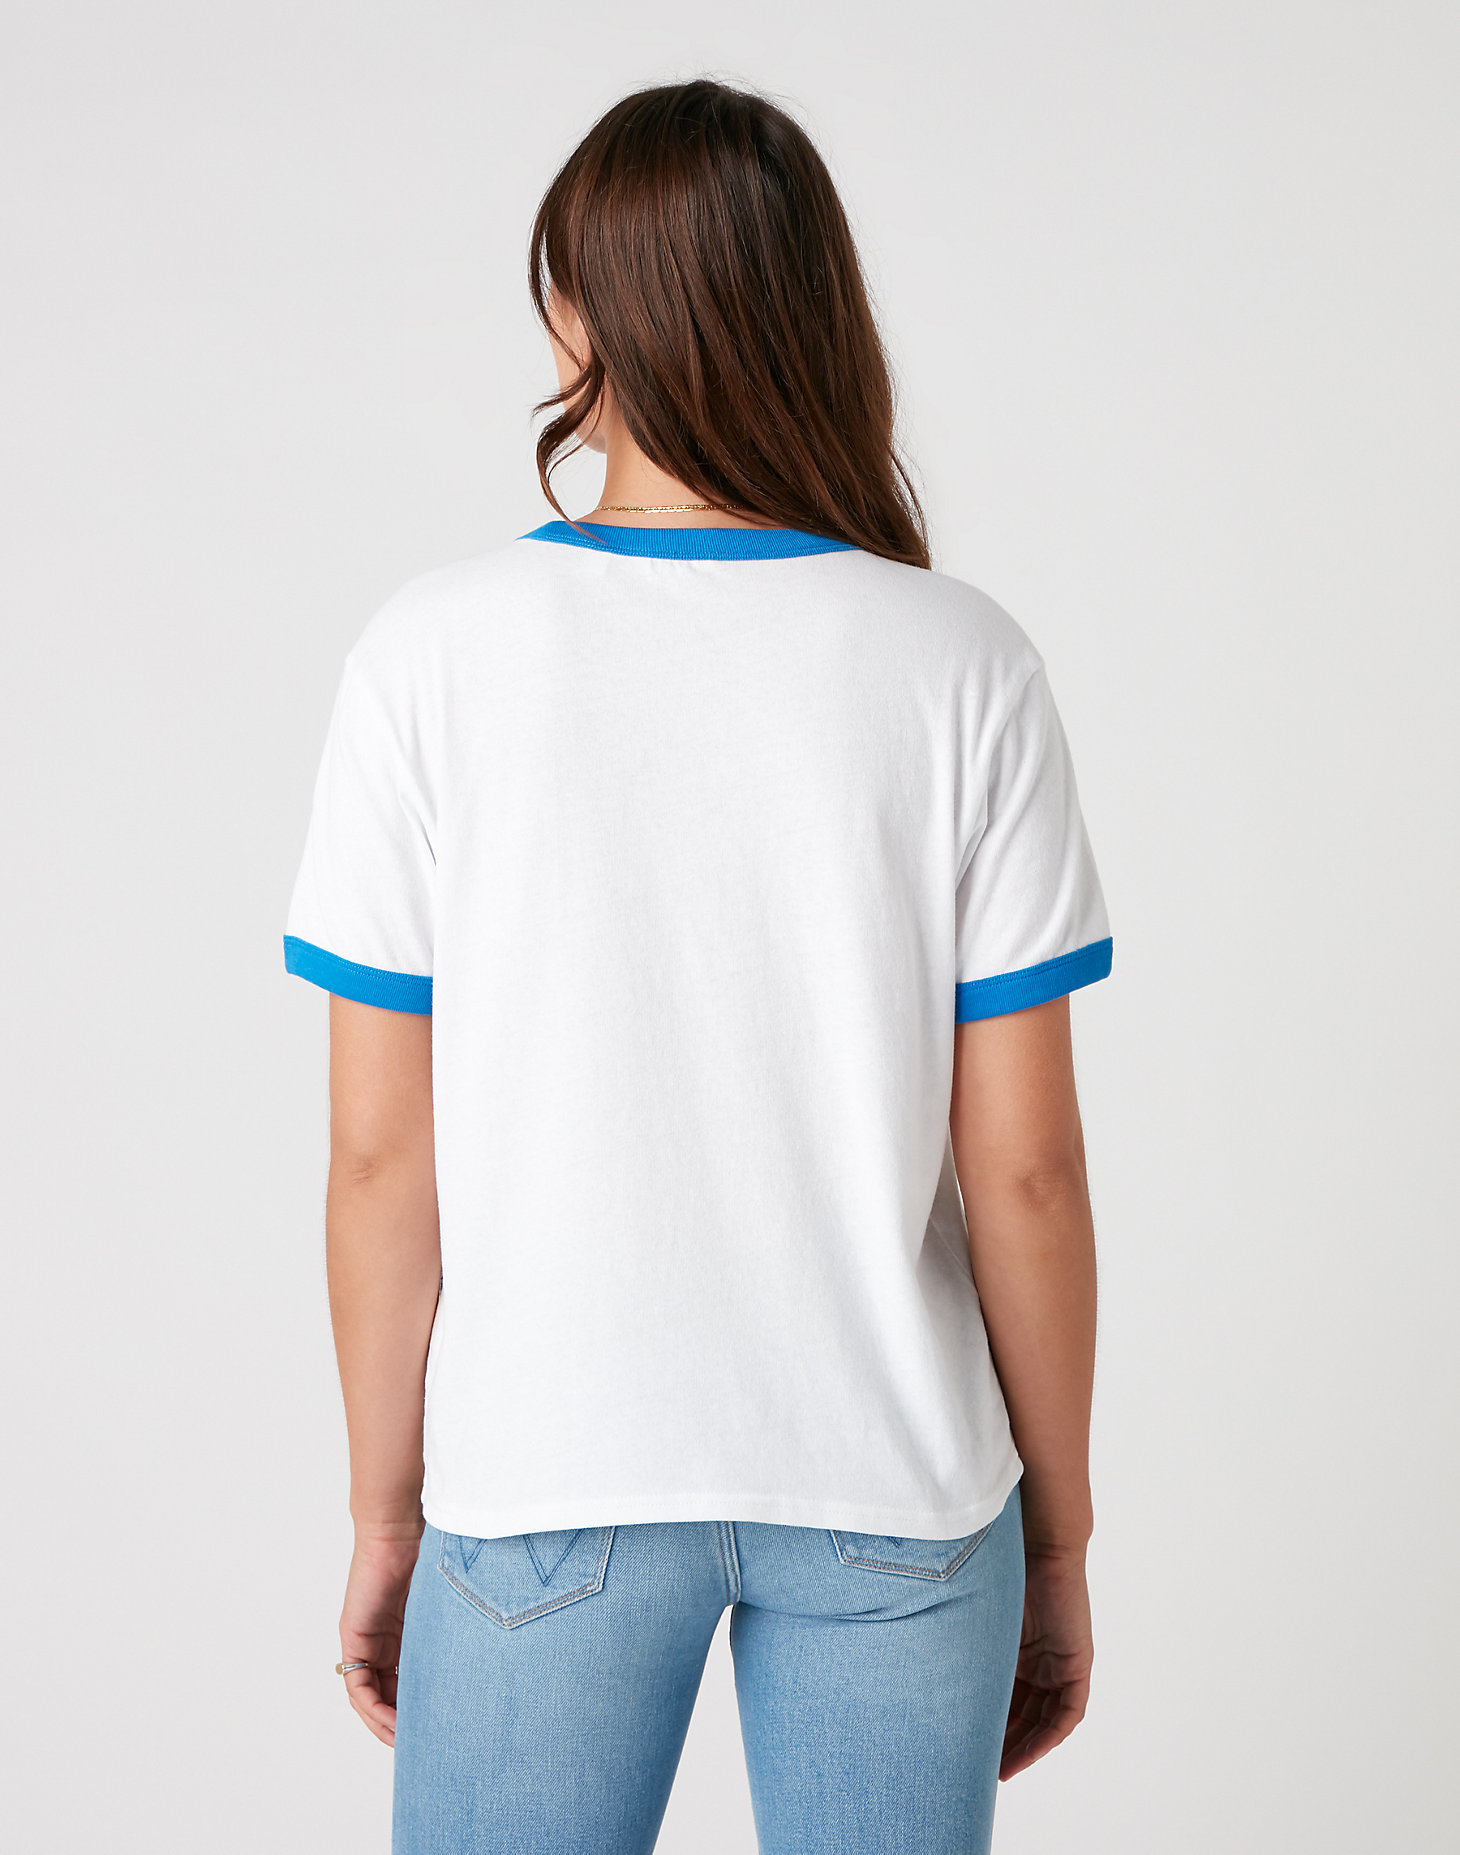 Relaxed Ringer Tee in White alternative view 2